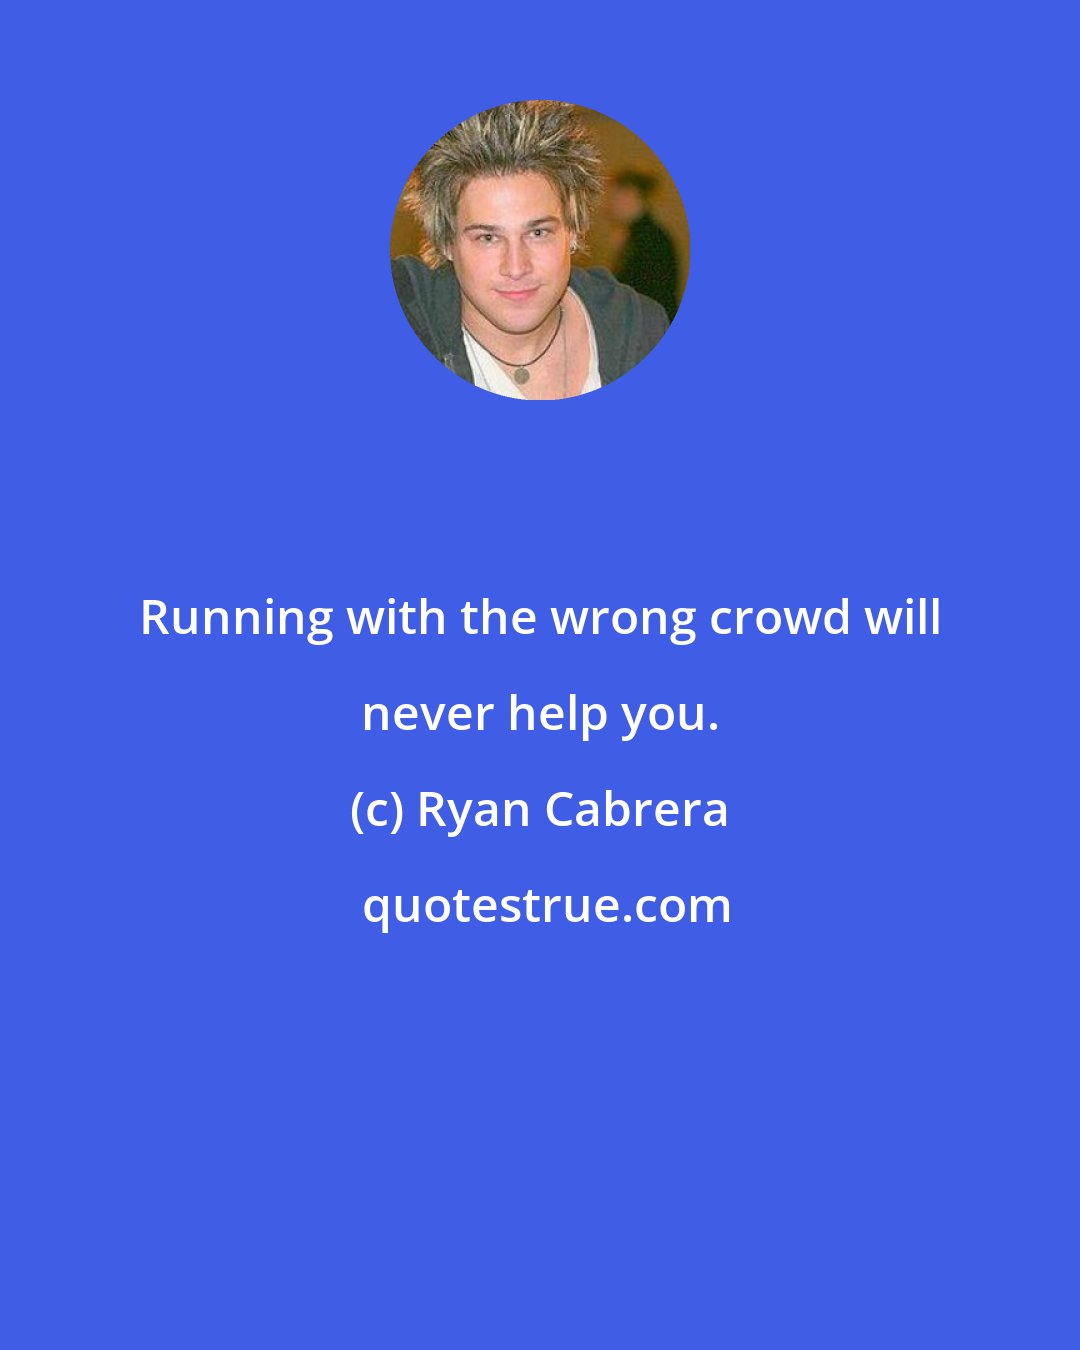 Ryan Cabrera: Running with the wrong crowd will never help you.